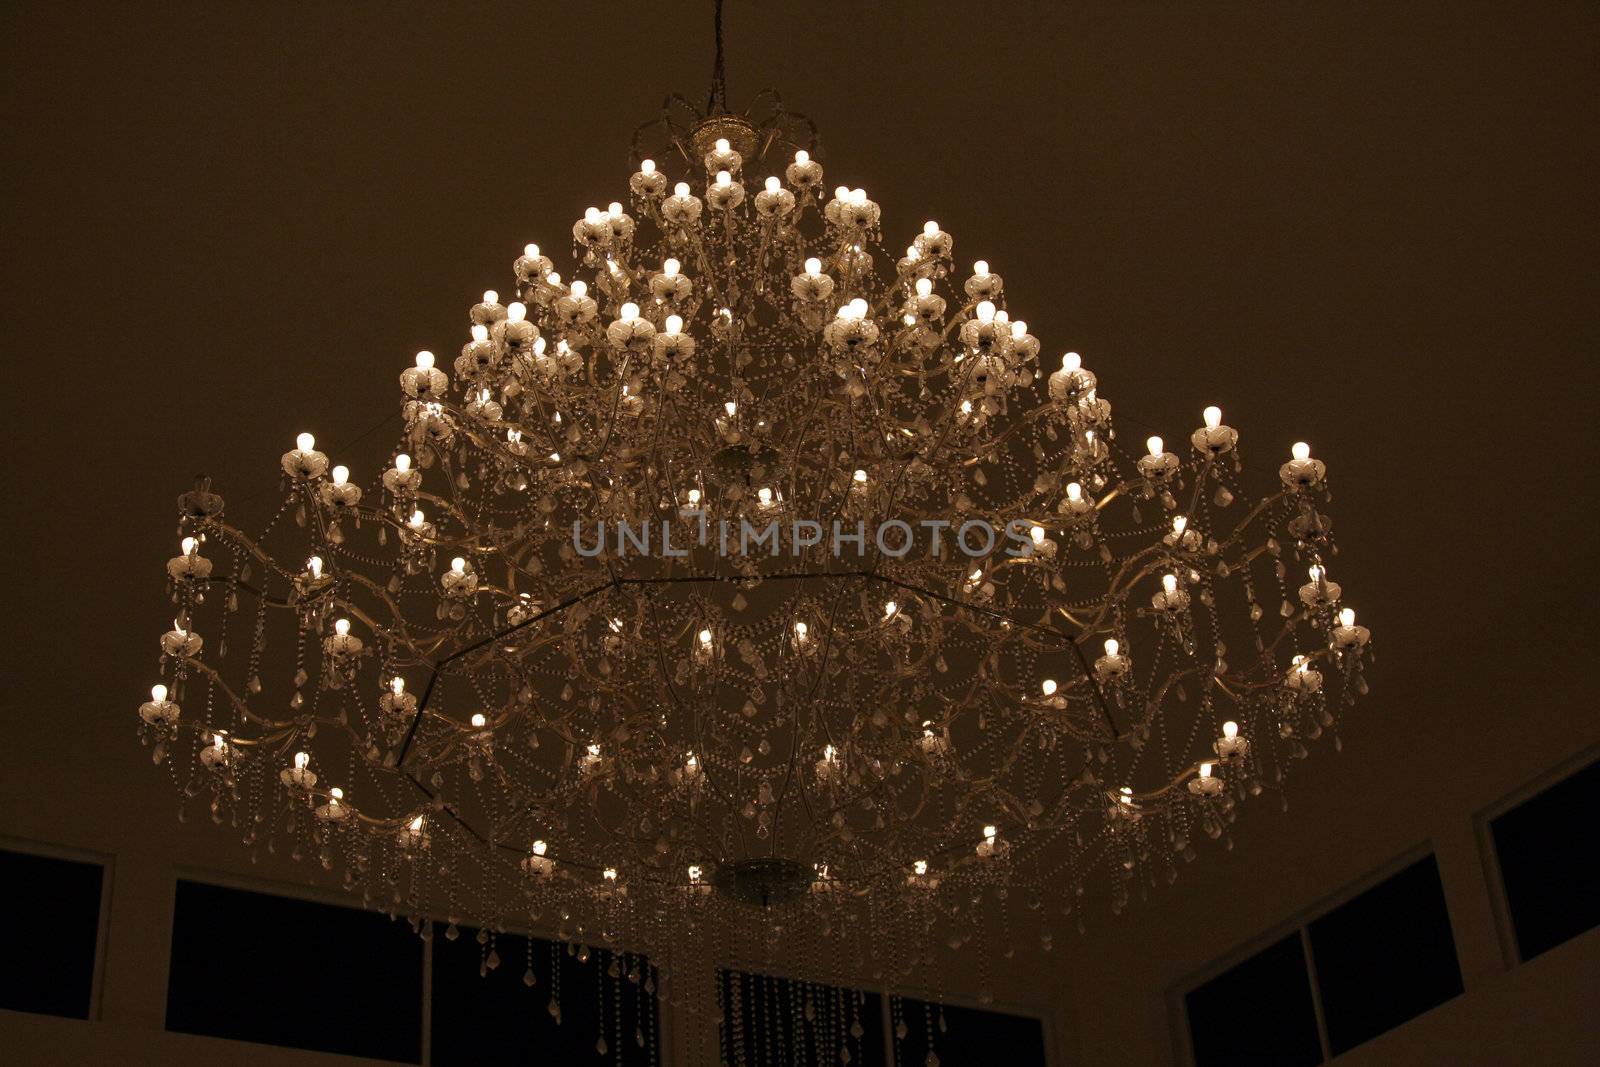 A Huge Chandelier hanging from the ceiling in a large room.